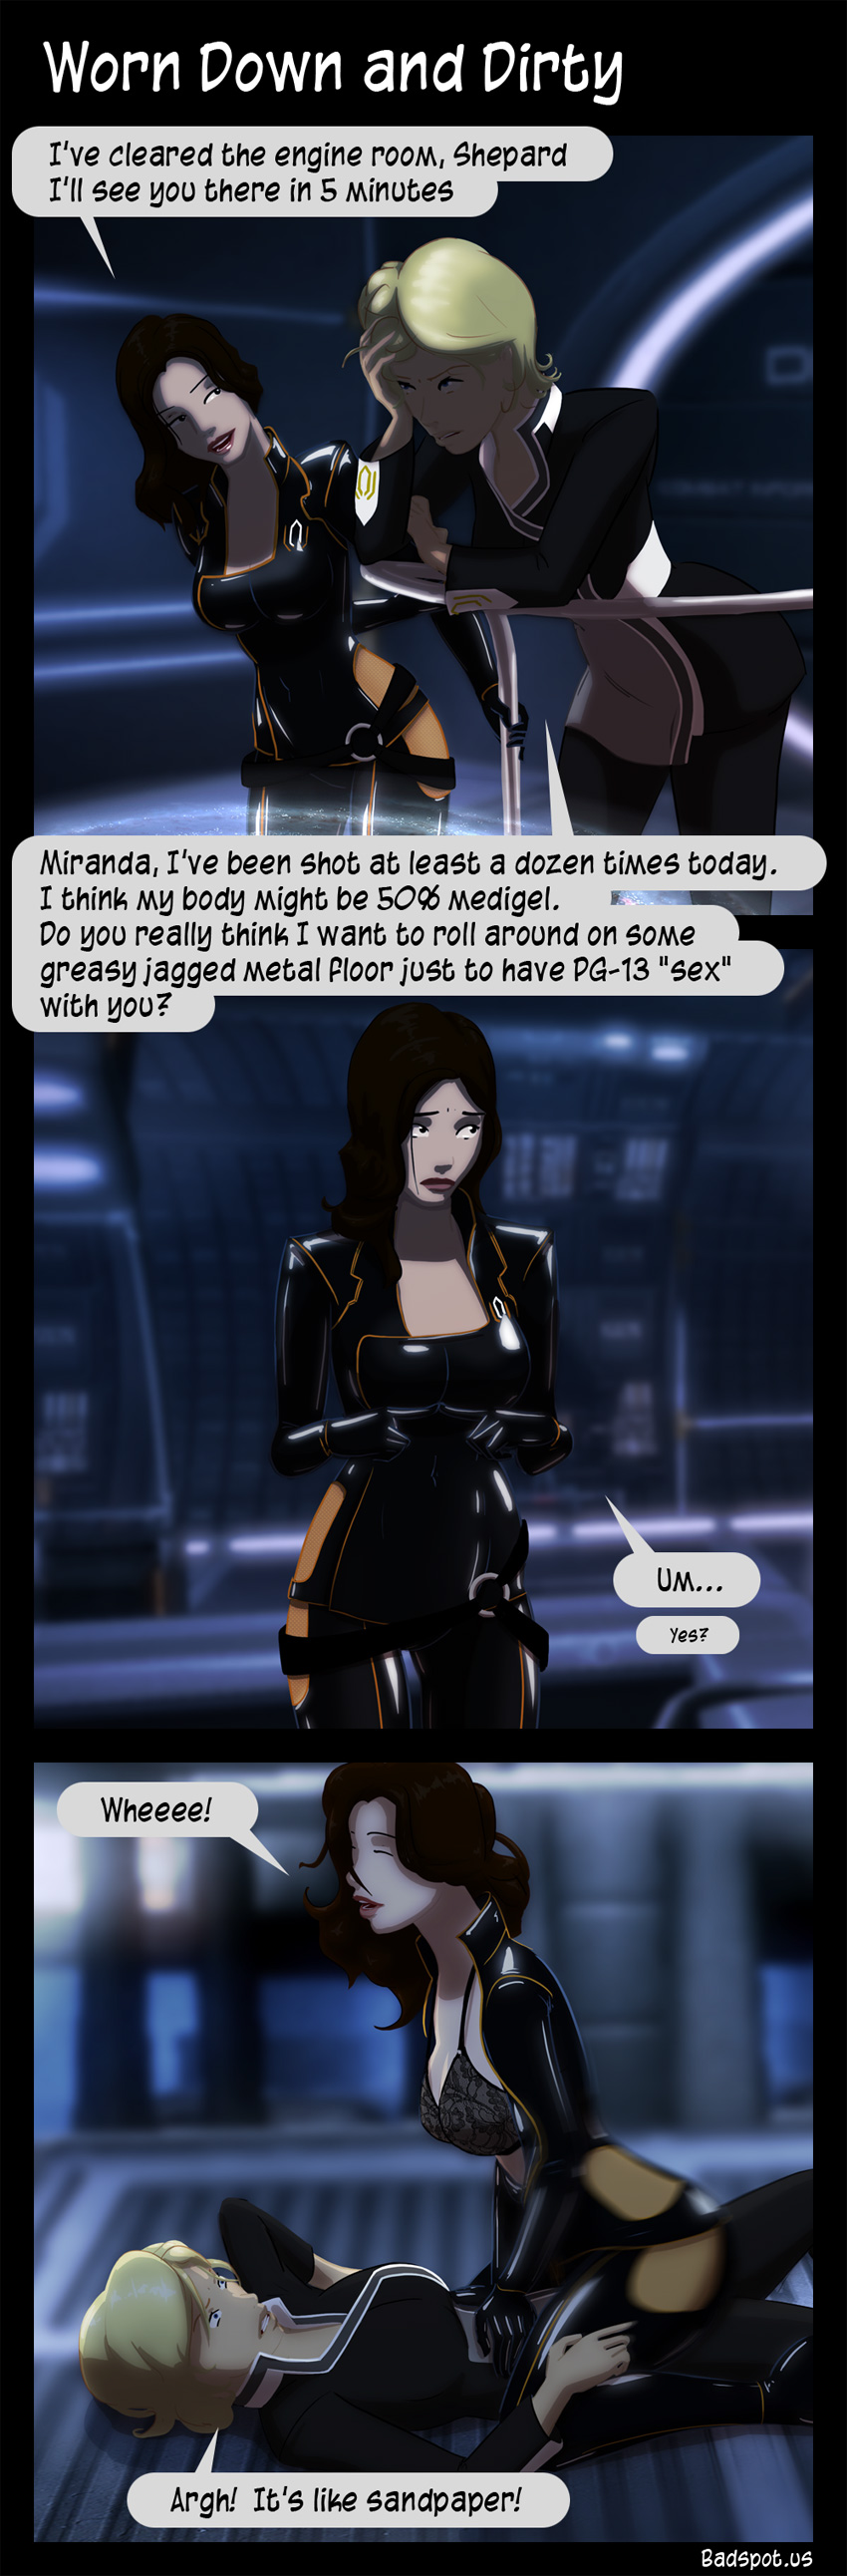 Mass Effect Comic Worn Down and Dirty